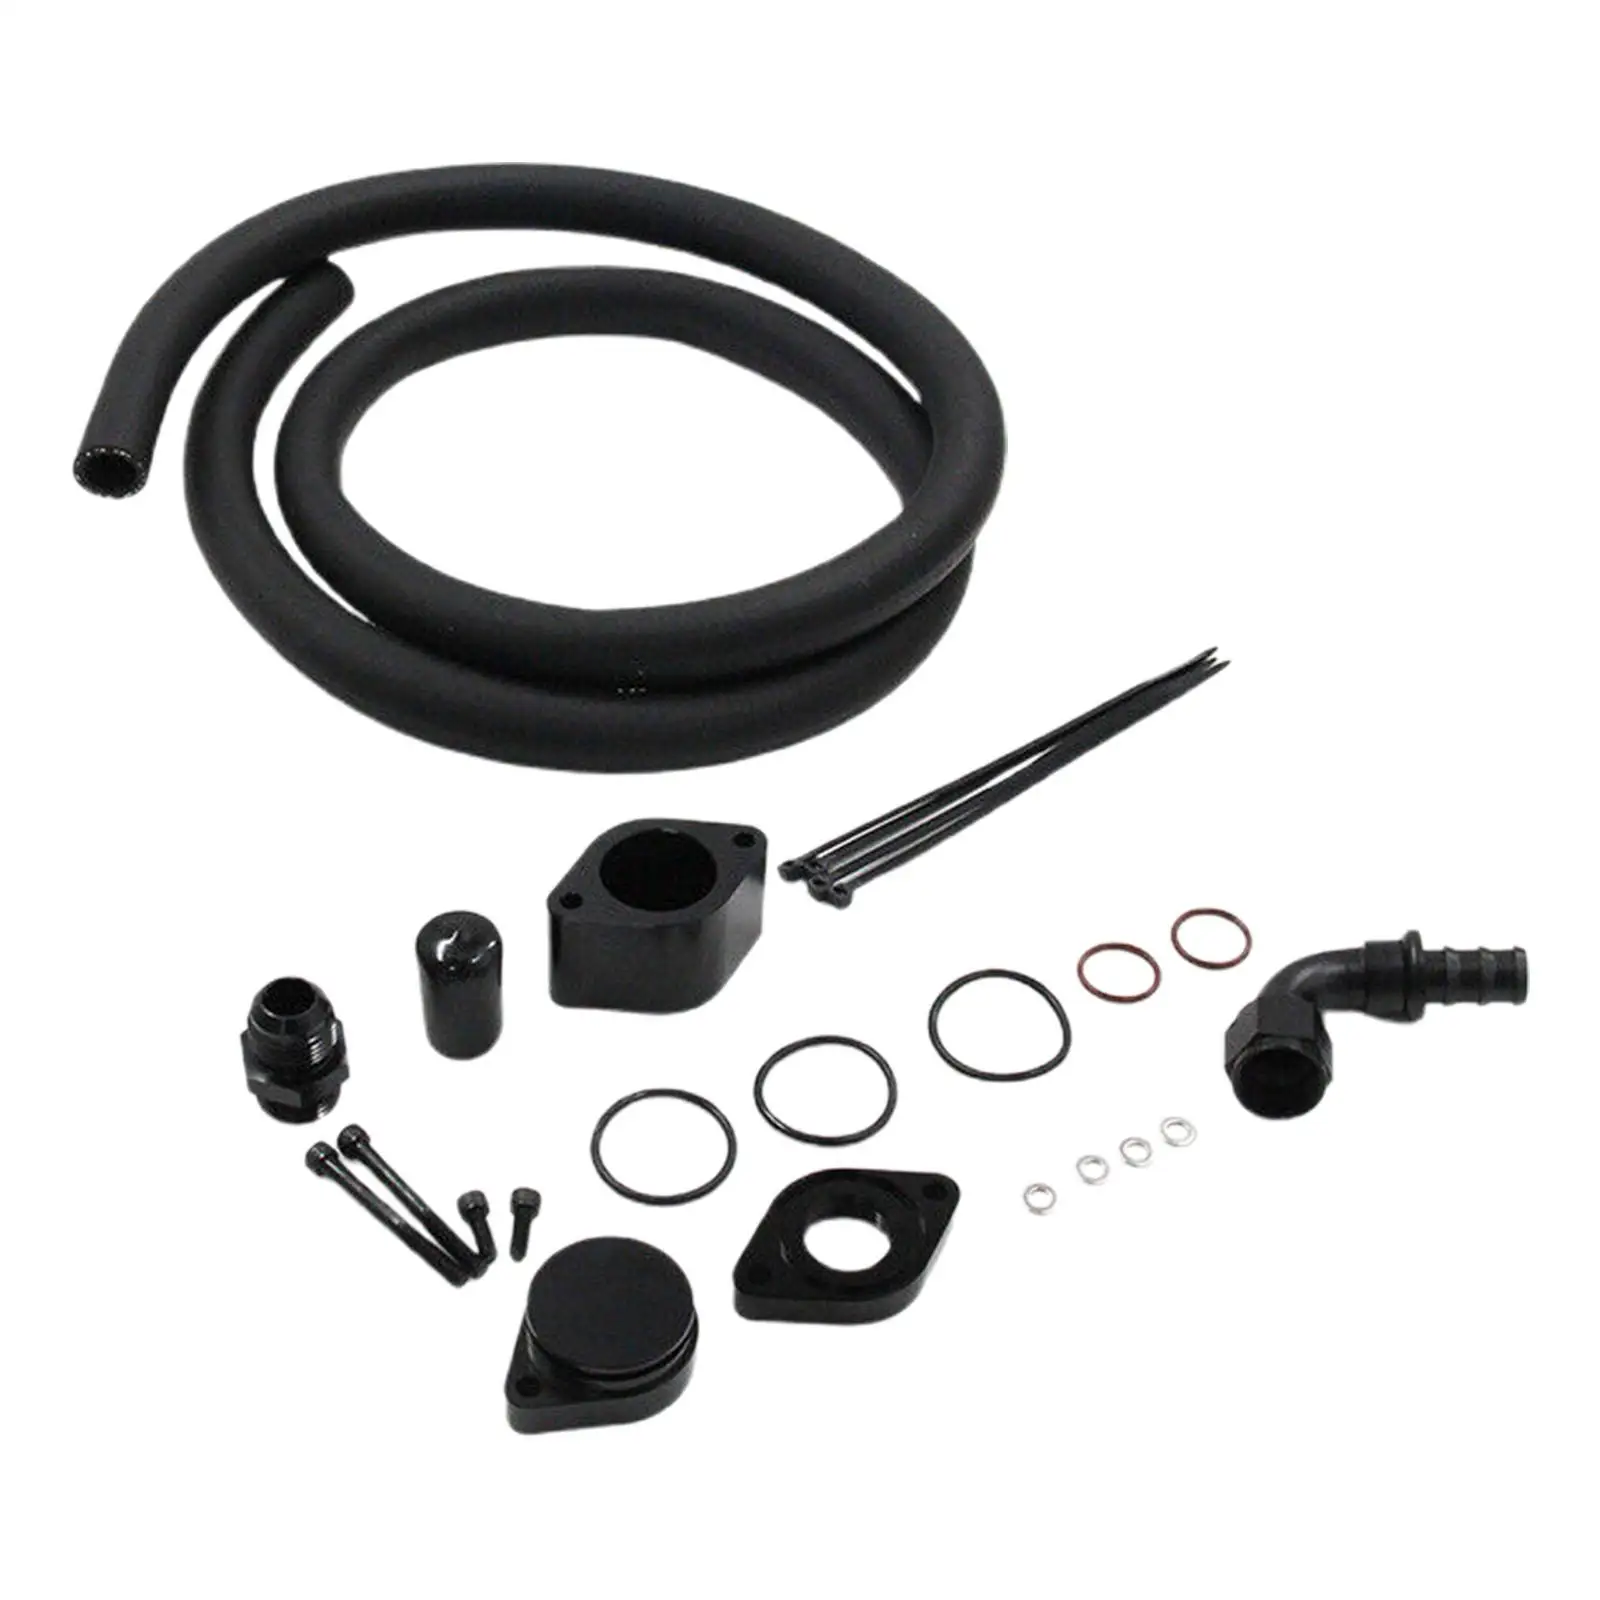 Pcv Reroute Engine Ventilation Kit Durable High Quality Replace Parts for 1120 6.7L Powerstroke Diesel  F350 F550 Accessories